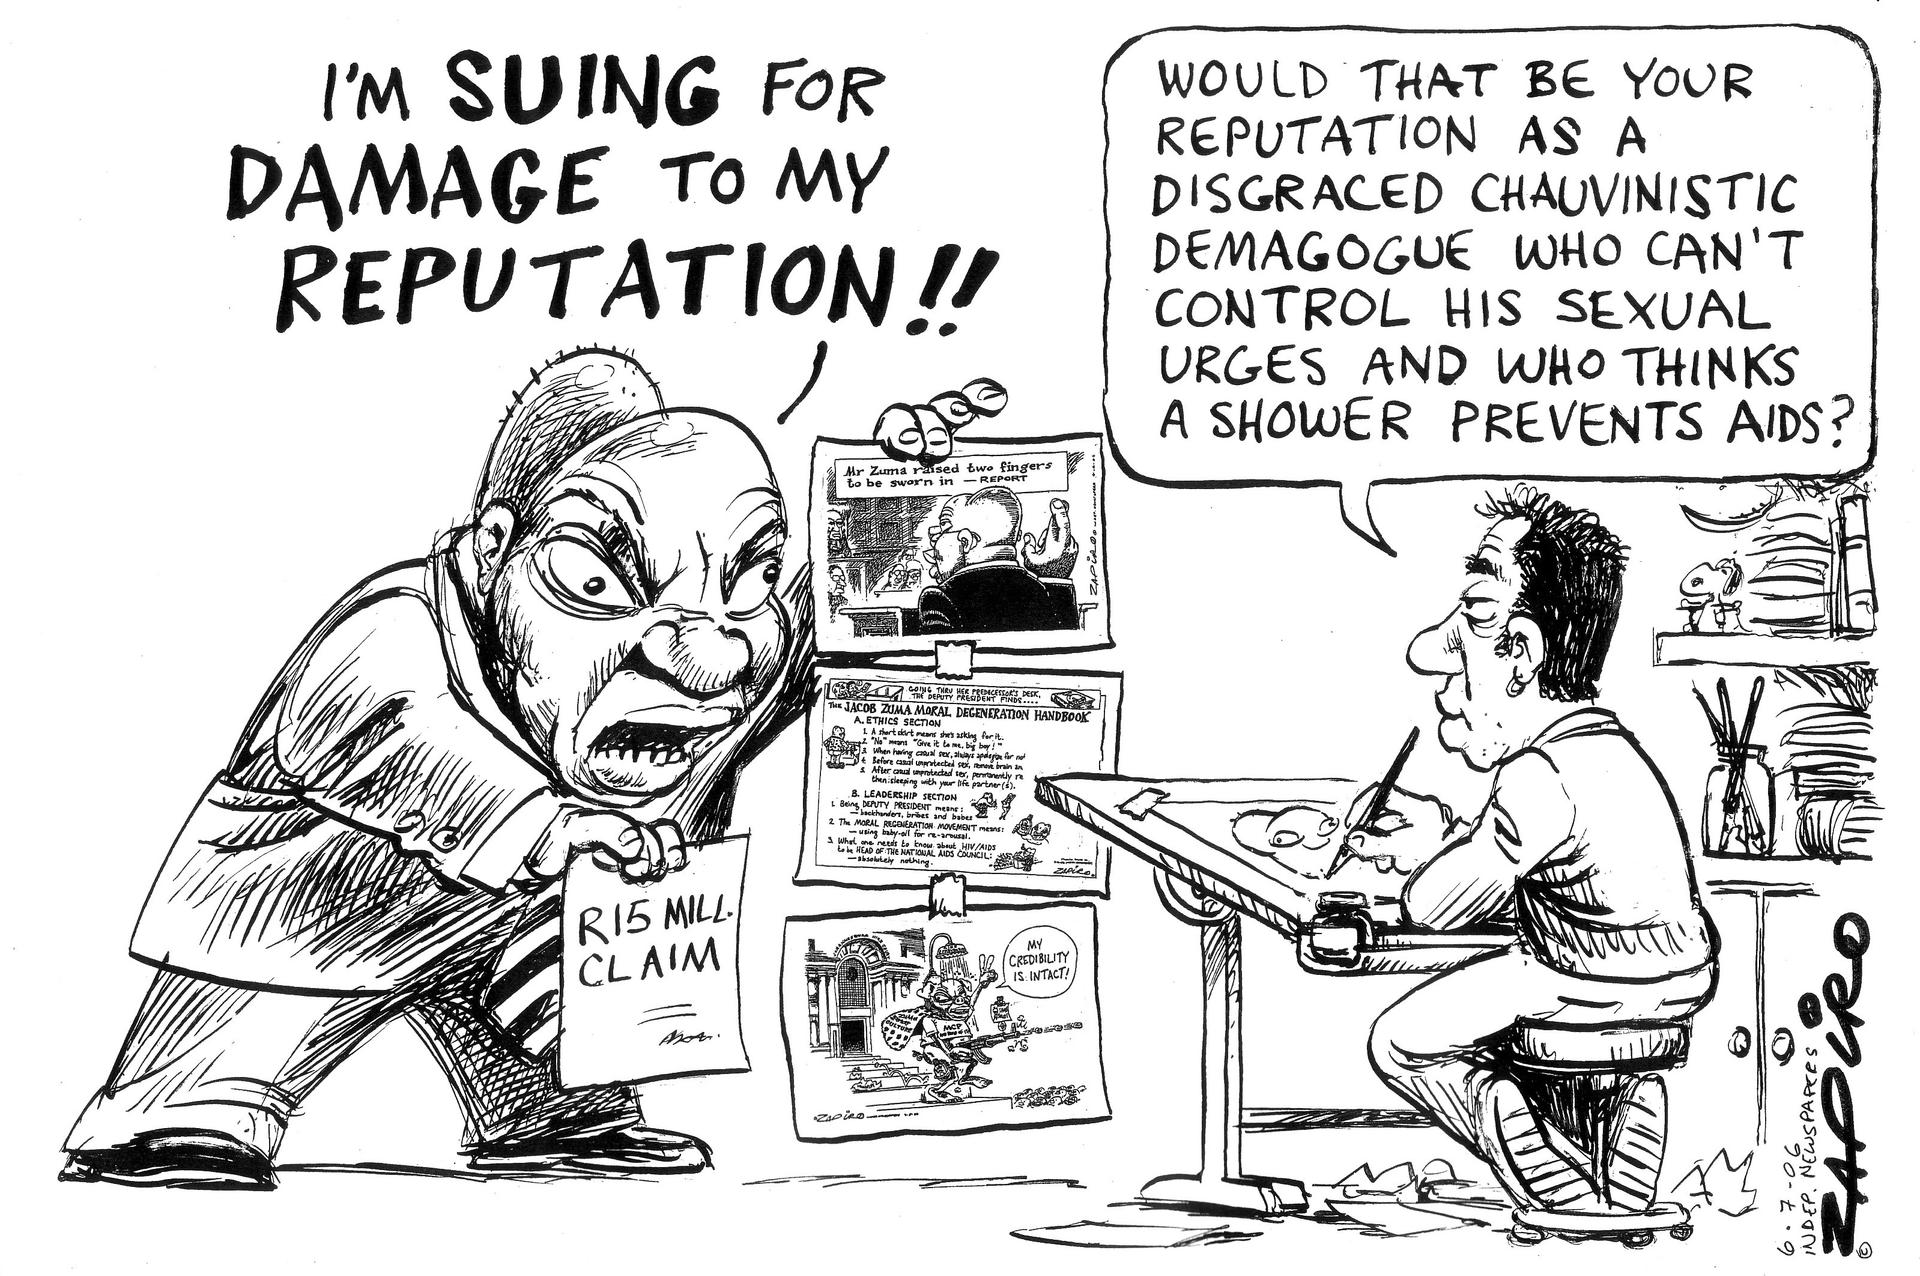 Cartoon shows Jacob Zuma yelling at Zapiro that he's suing him for defamation of character. Zapiro responds by impugning Zuma's character based on his actions.